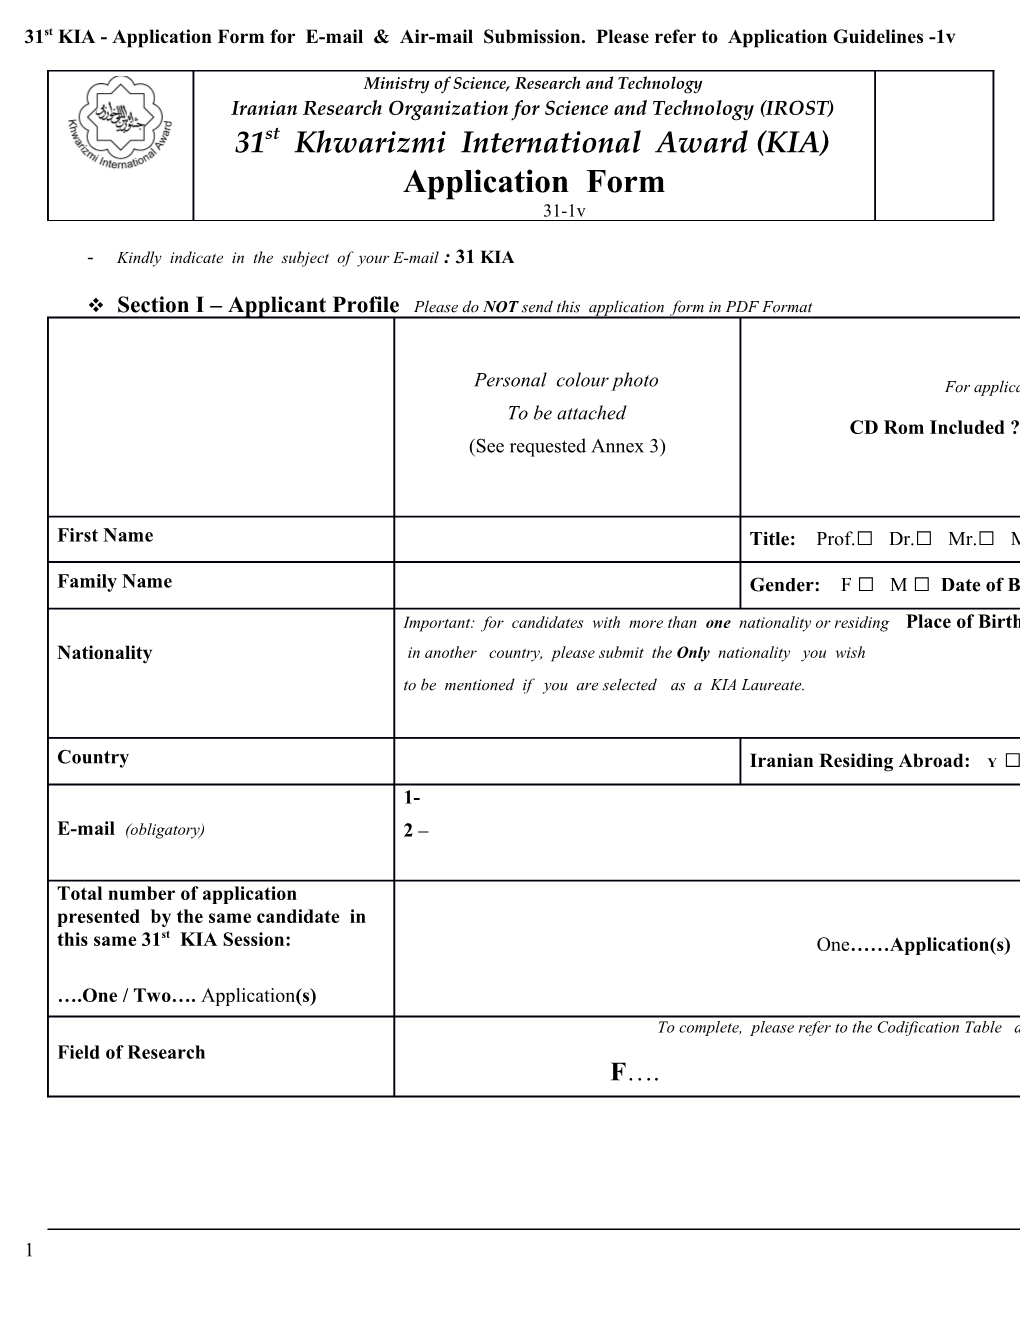 31St KIA - Application Form for E-Mail & Air-Mail Submission. Please Refer to Application